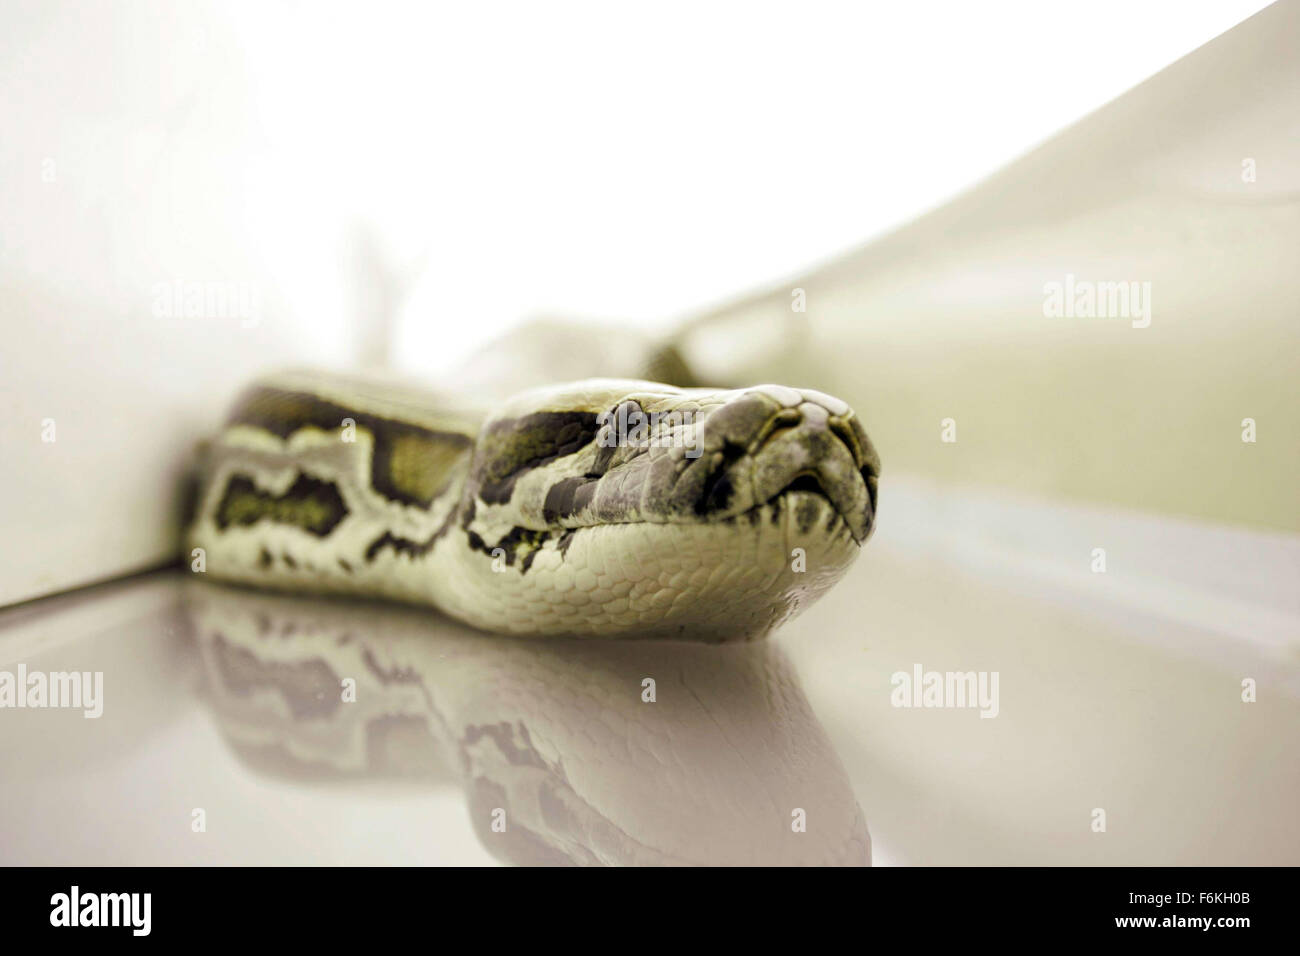 RELEASE DATE: August 18, 2006. MOVIE TITLE: Snakes on a Plane. STUDIO: New Line Cinema. PLOT: An FBI agent takes on a plane full of deadly and poisonous snakes, deliberately released to kill a witness being flown from Honolulu to Los Angeles to testify against a mob boss. PICTURED: . Stock Photo